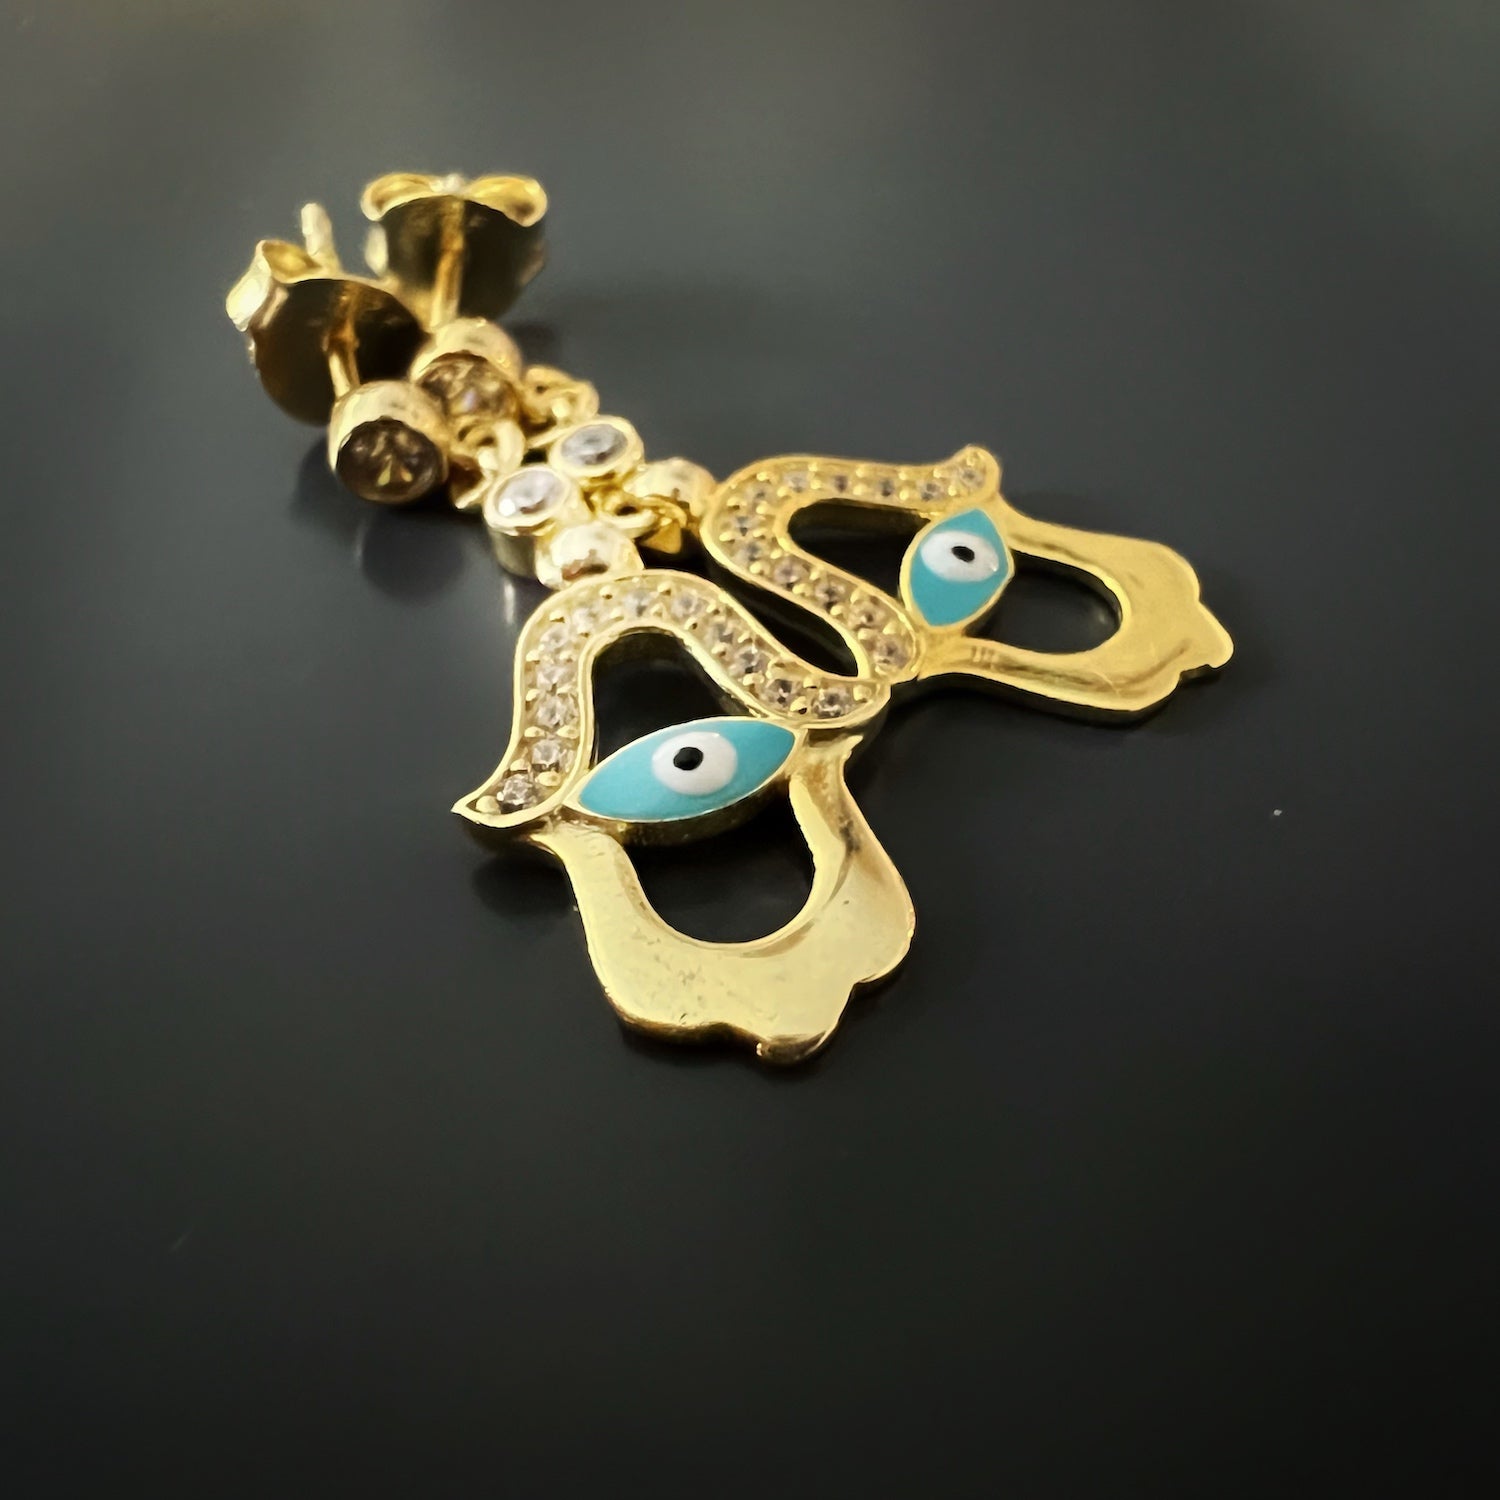 Stunning Turquoise Evil Eye Gold Hamsa Earrings, a perfect blend of style and spirituality